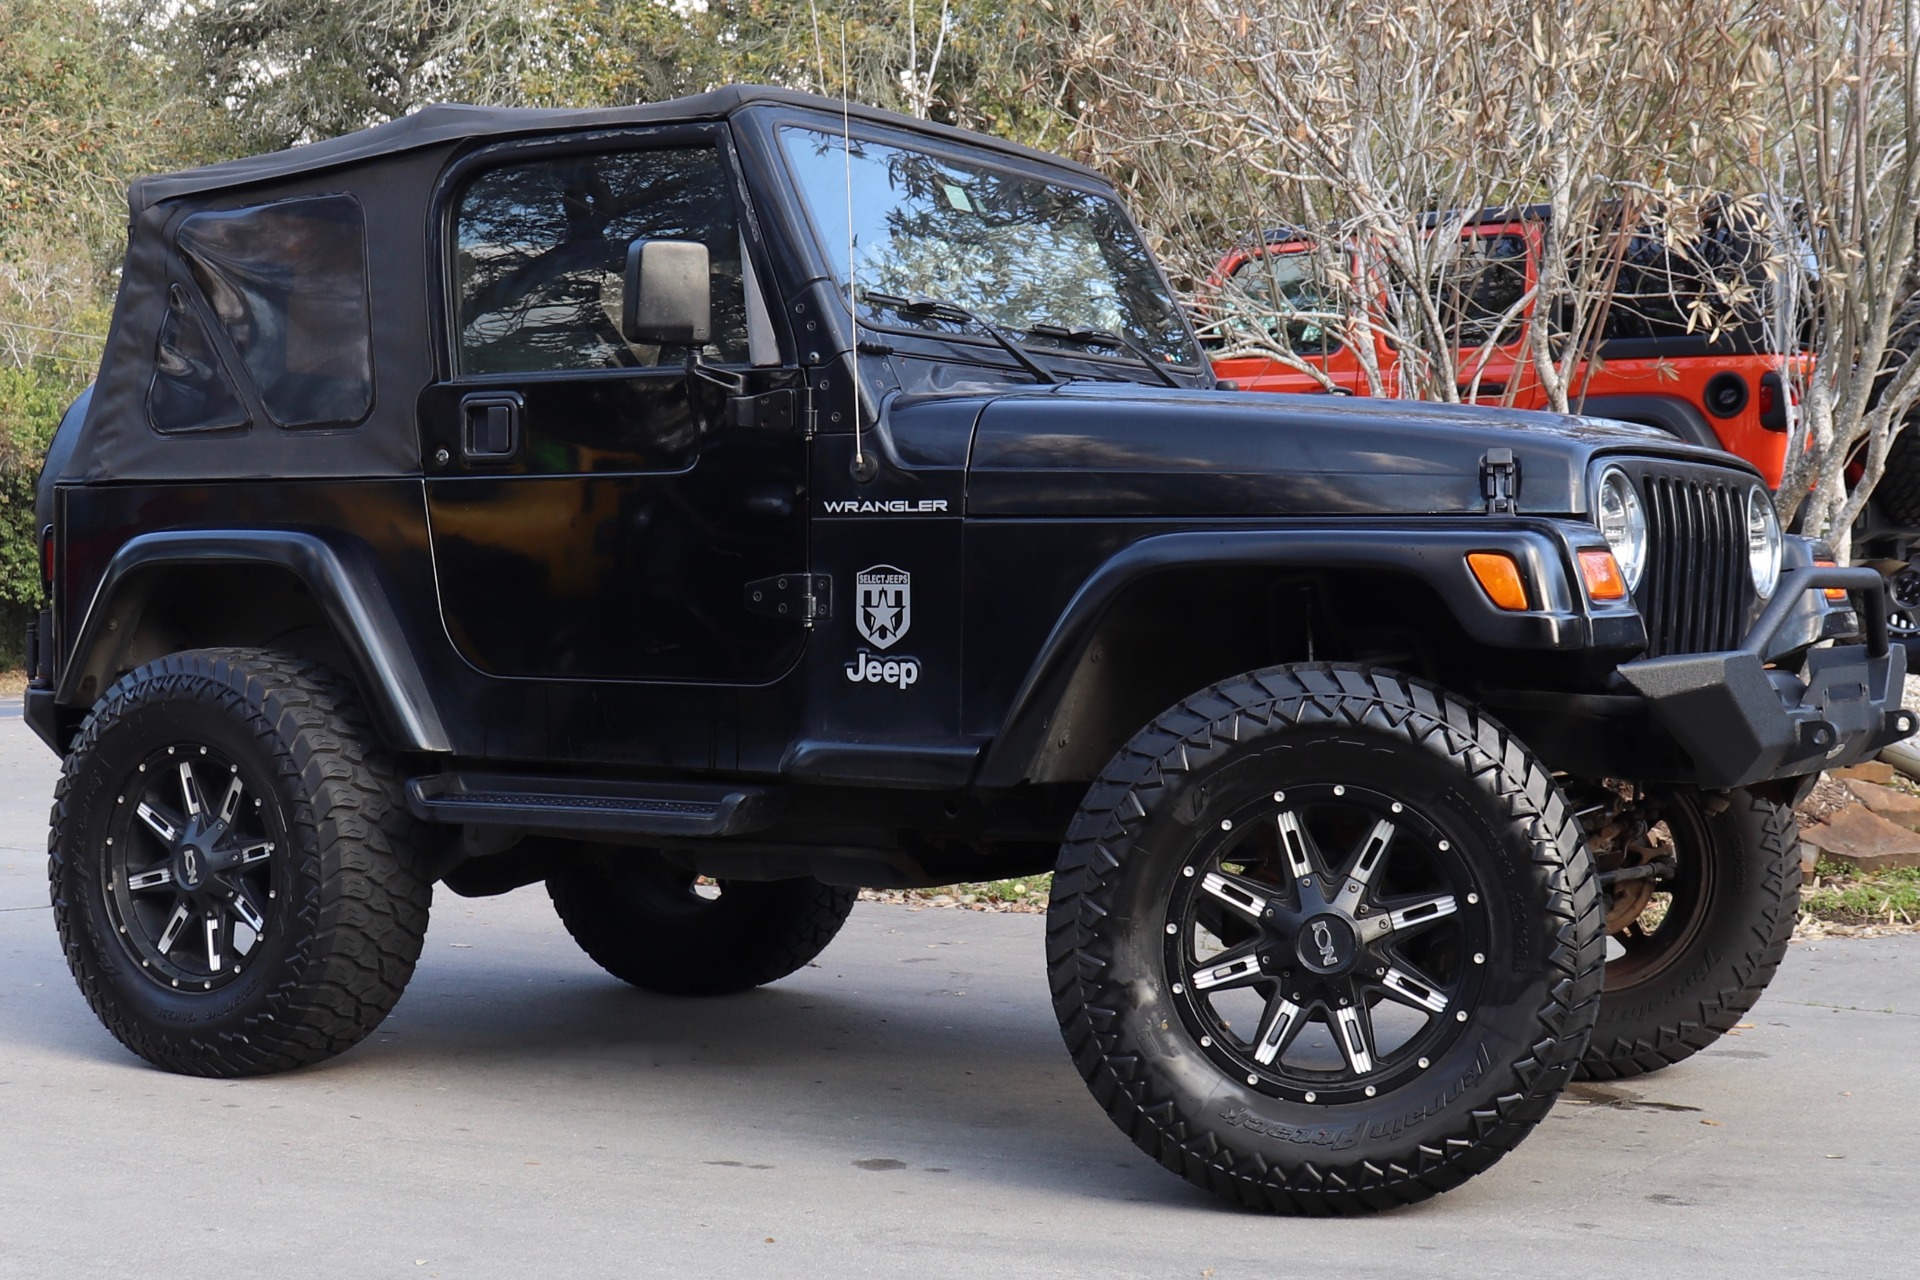 Used 2002 Jeep Wrangler X For Sale ($14,995) | Select Jeeps Inc. Stock  #752260